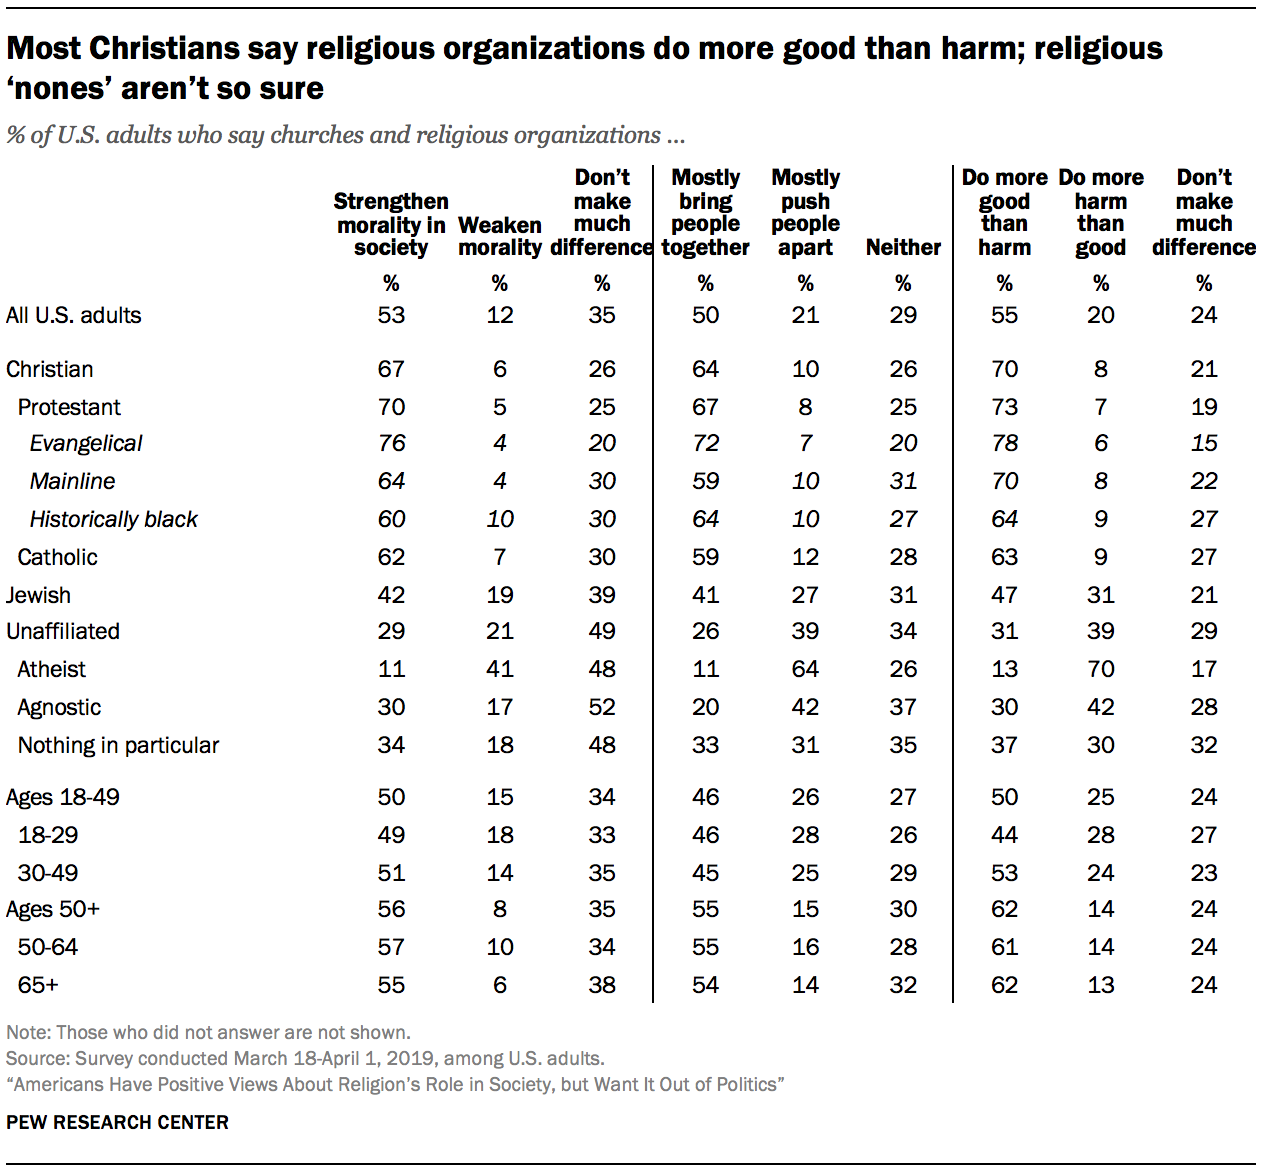 Most Christians say religious organizations do more good than harm; religious 'nones' aren't so sure